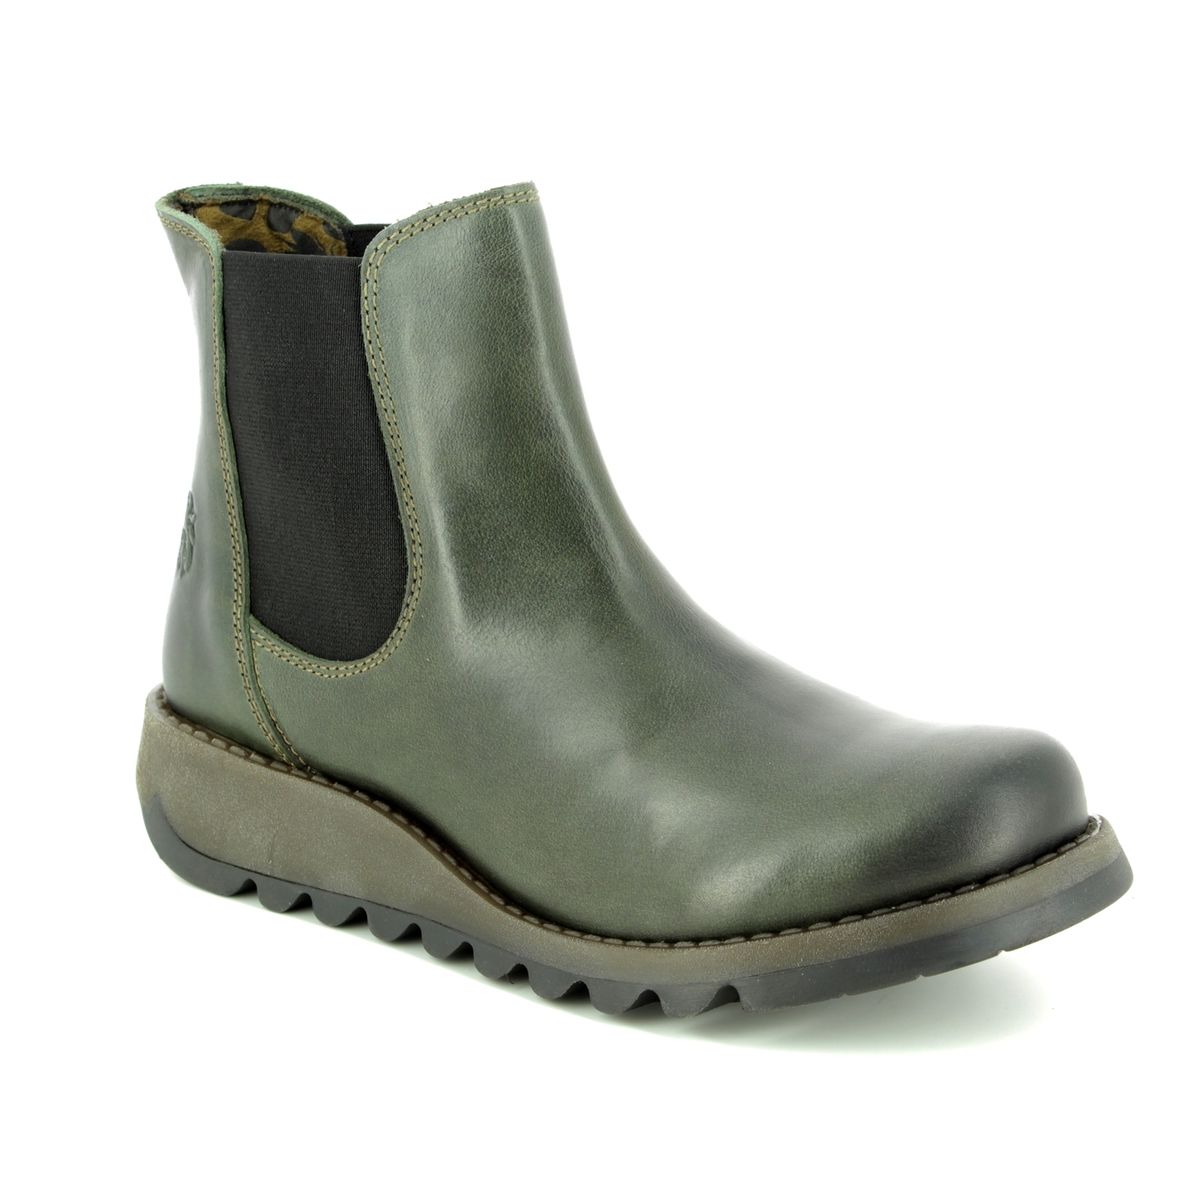 Fly London Salv Diesel Leather Womens Ankle Boots P143195 In Size 39 In Plain Diesel Leather